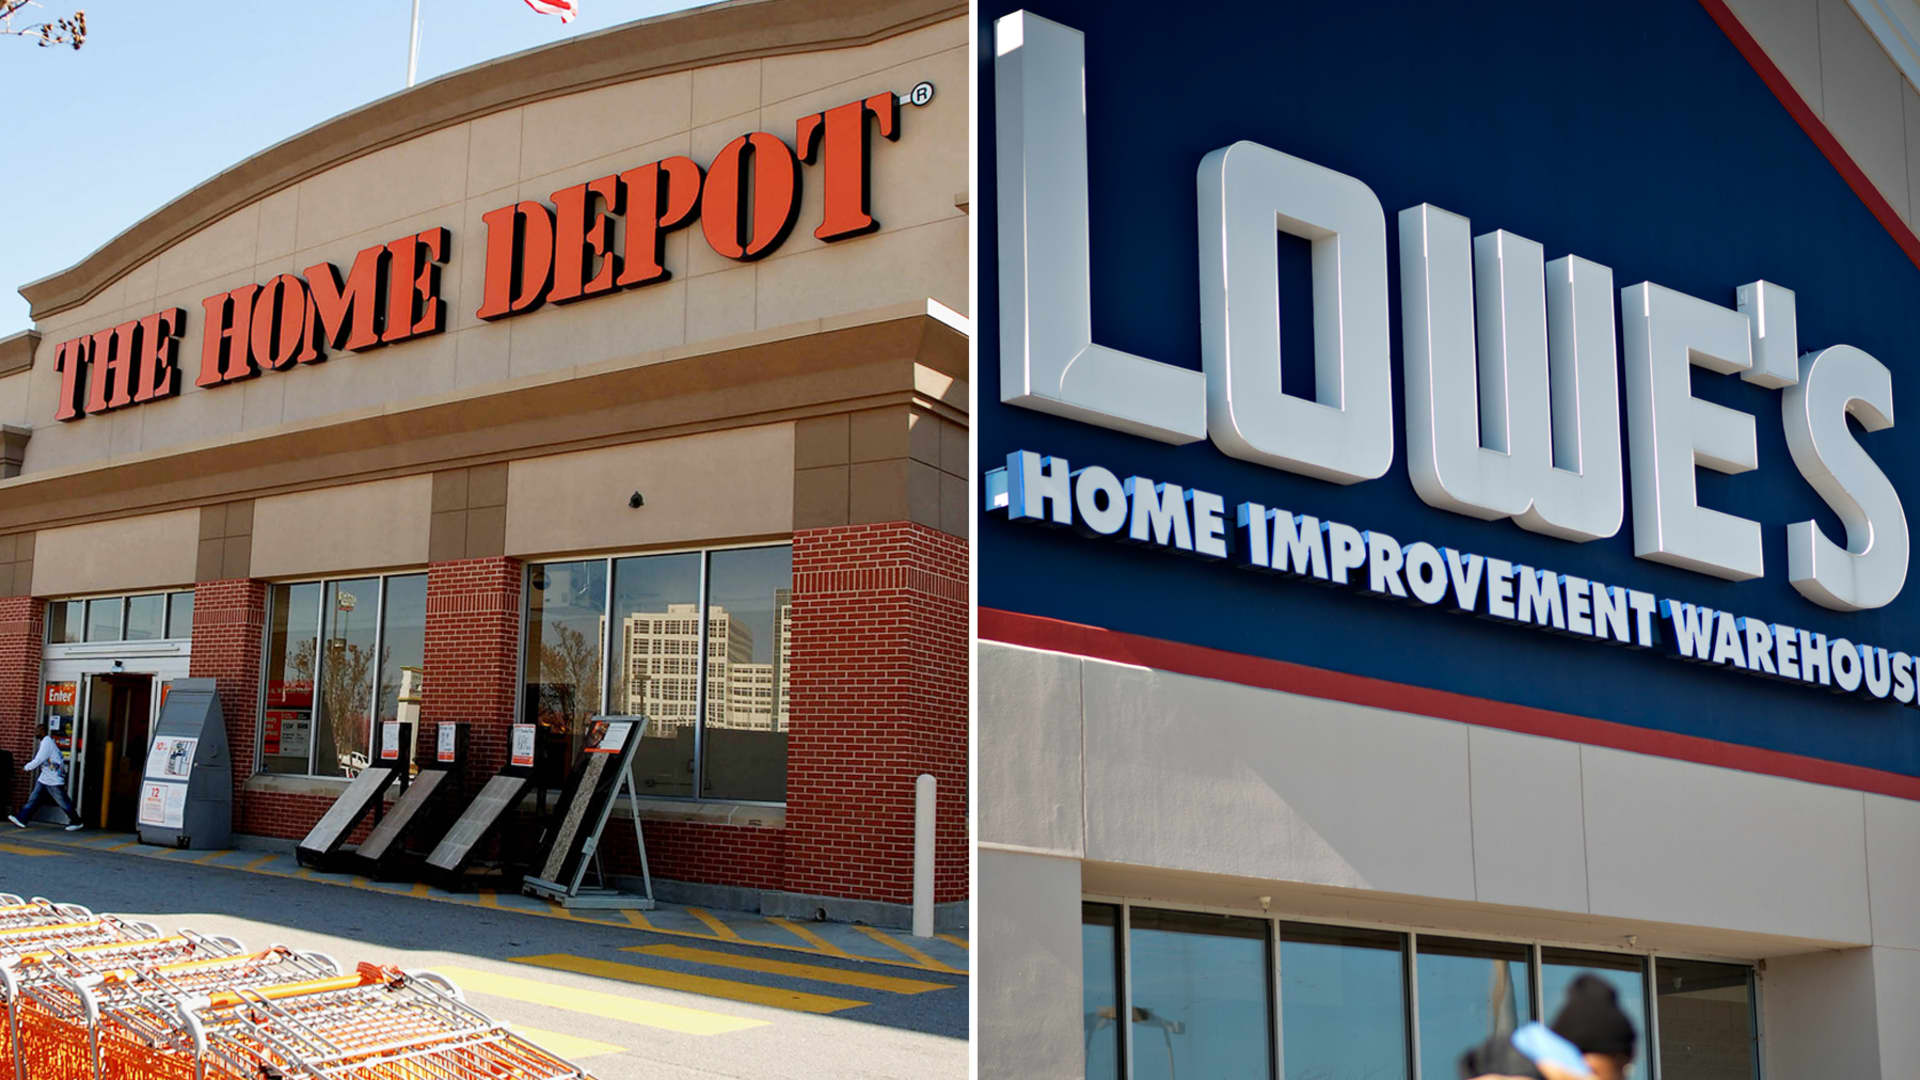 Home Depot and Lowe's stores